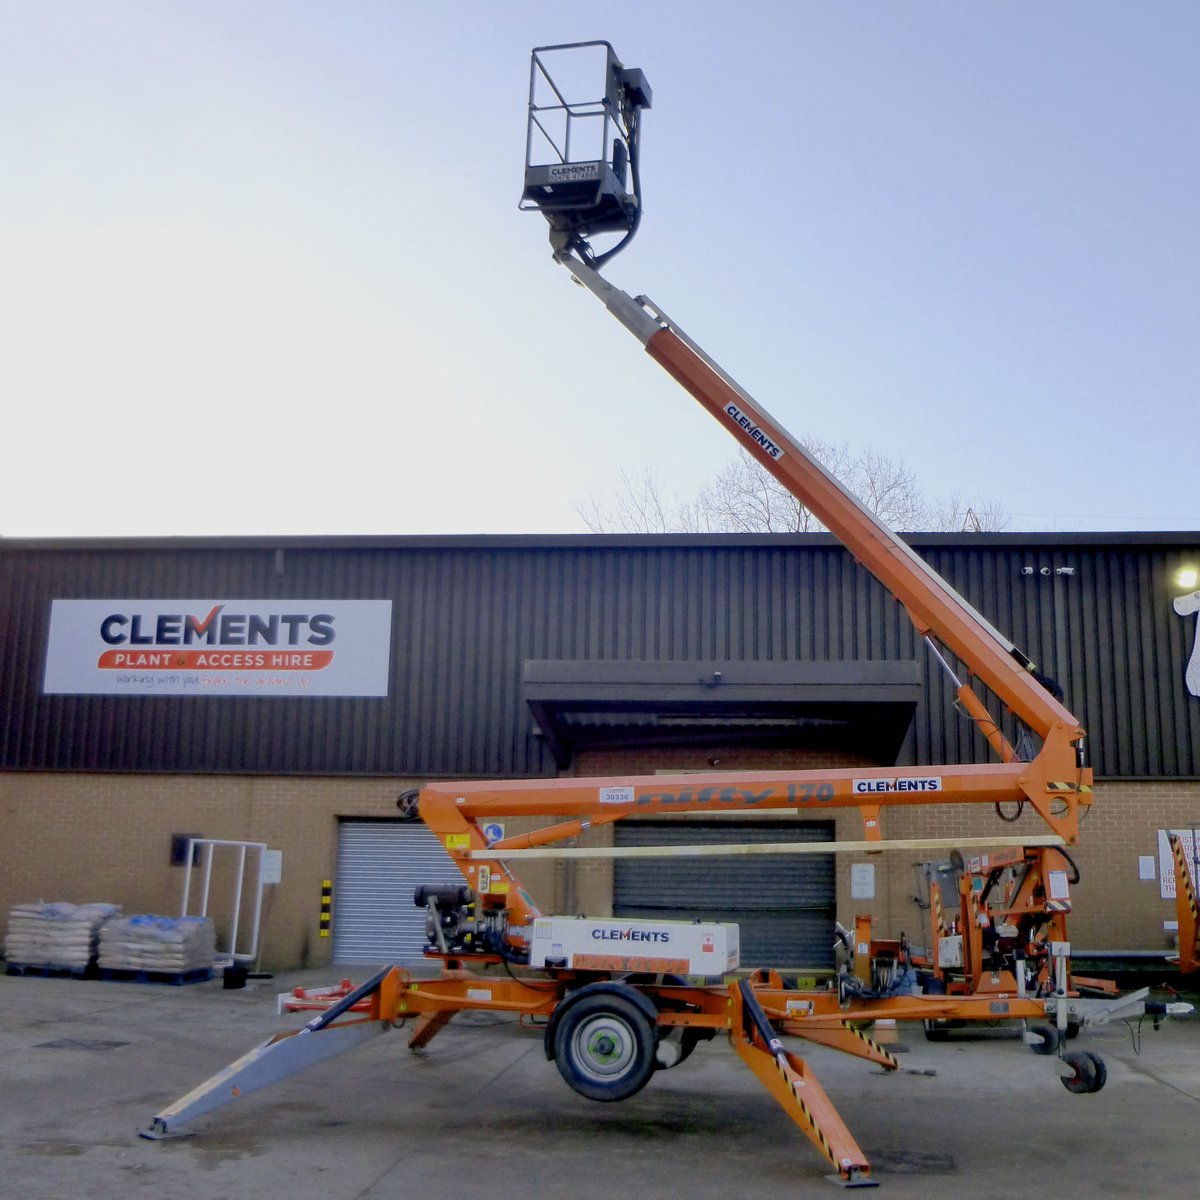 The ultimate pick up & go cherry picker is back in stock. This @niftyliftworld 170T trailer mounted boom lift can be towed away from our depot, enabling you to work at heights up to 17m. To check out the specs: buff.ly/49iCULP. Or call the office on 02476 474849.